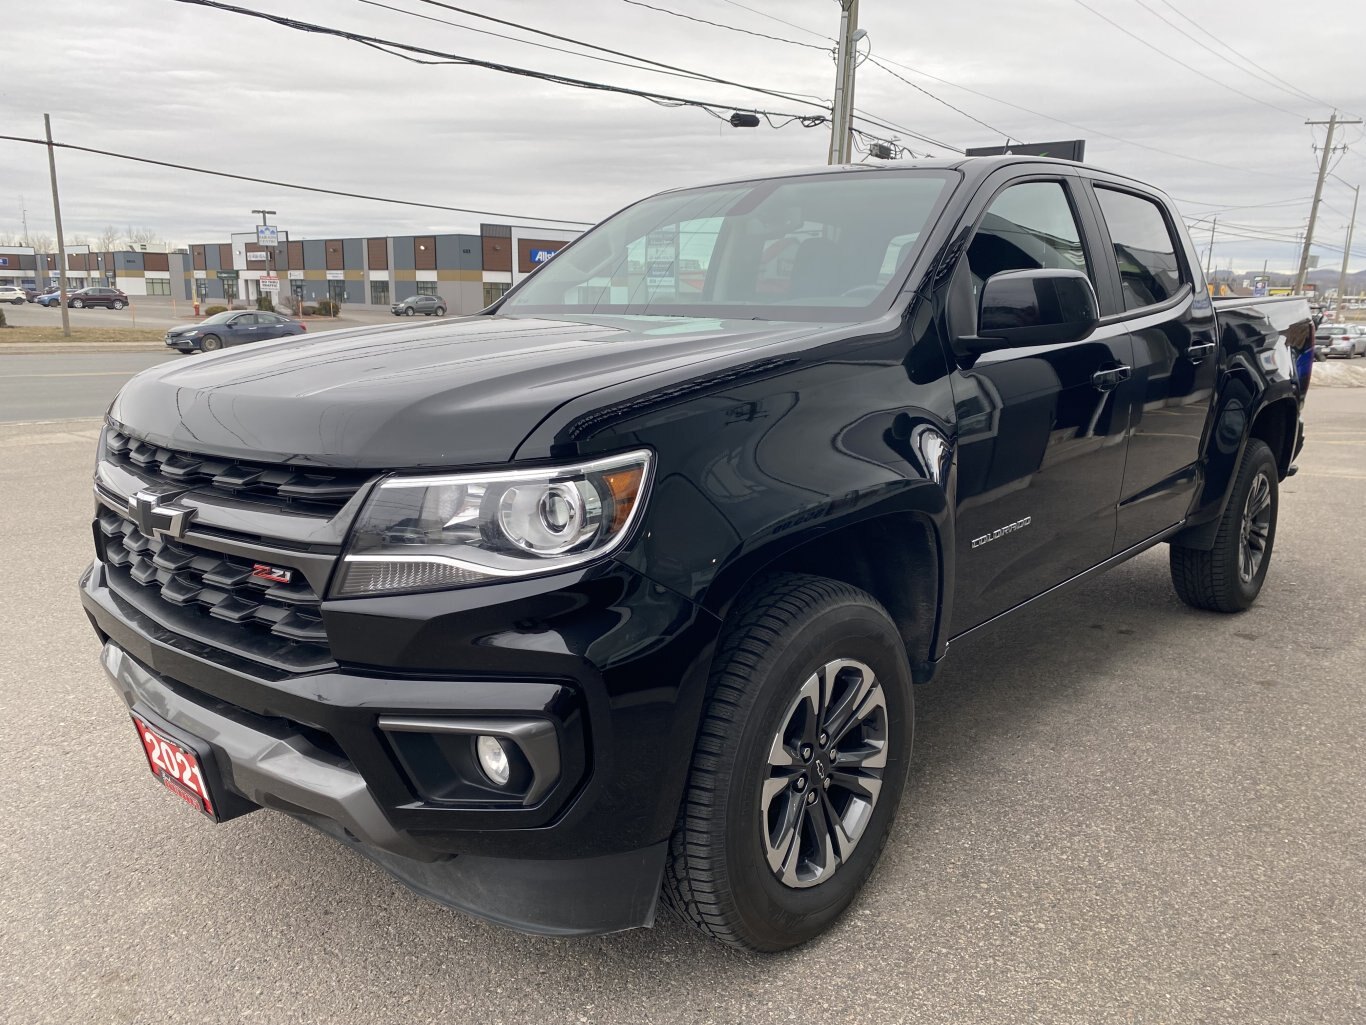 2021 CHEVROLET COLORADO Z71 4X4 CREWCAB WITH HEATED SEATS, HEATED STEERING WHEEL AND REAR VIEW CAMERA!!